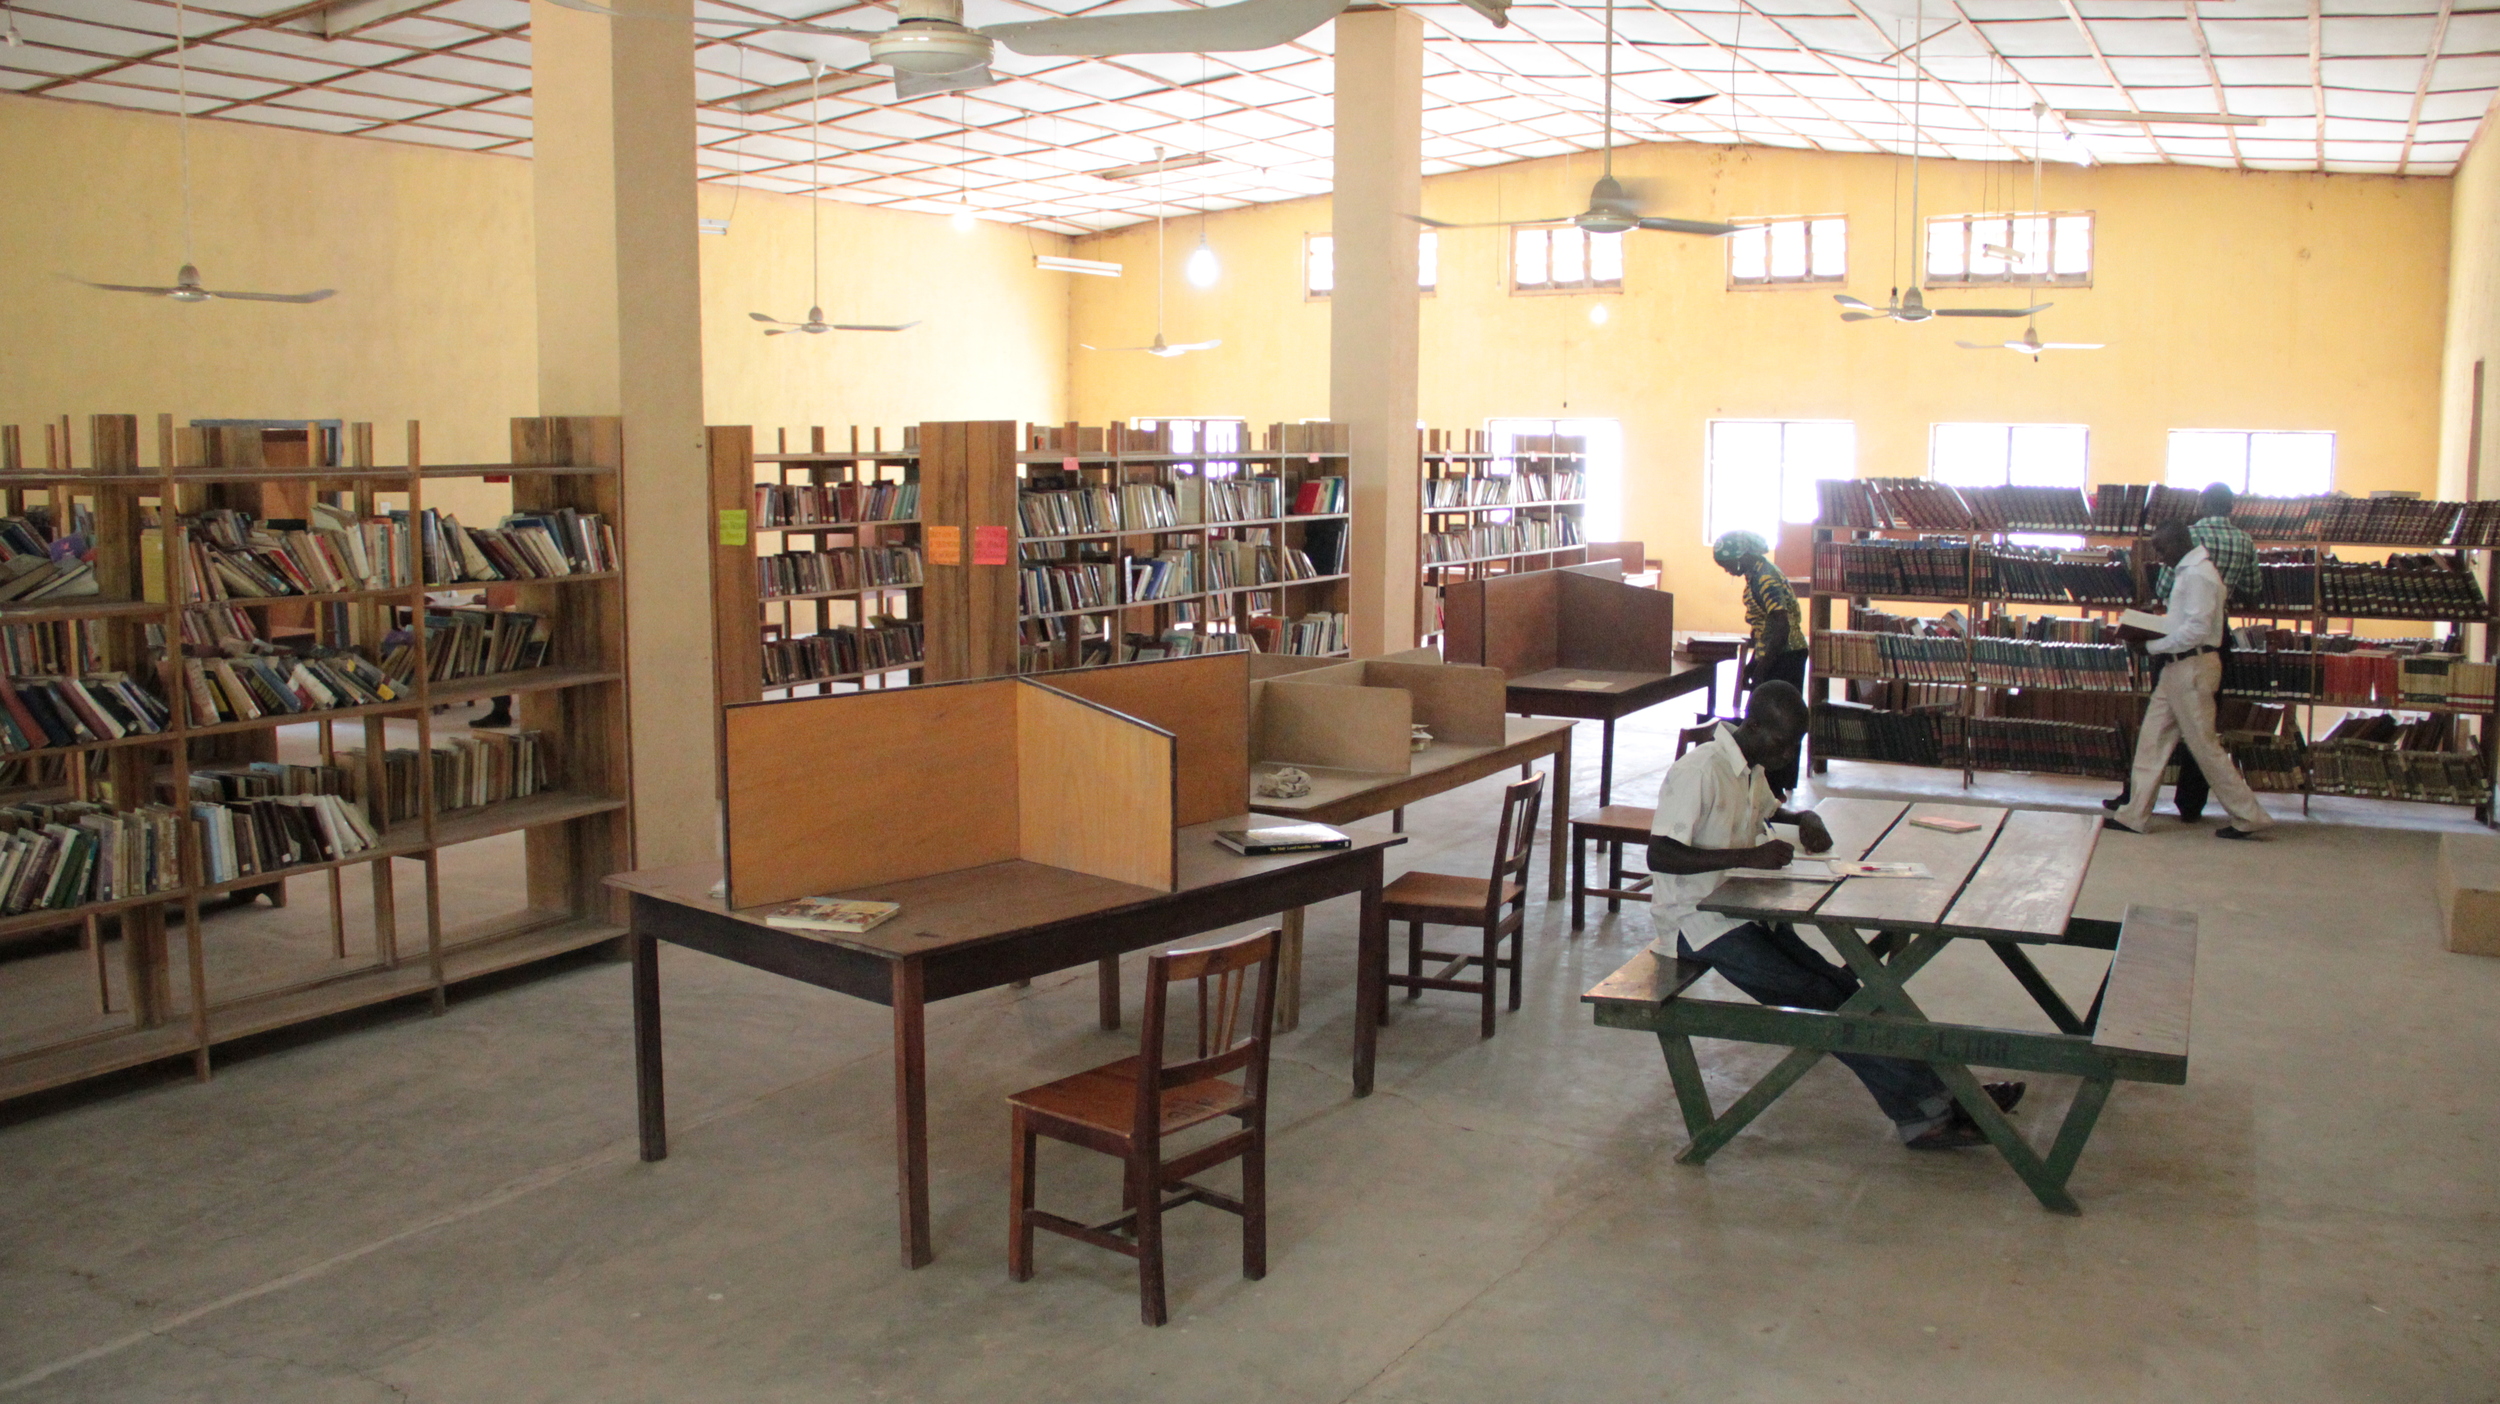  R. Job Library main collection room 